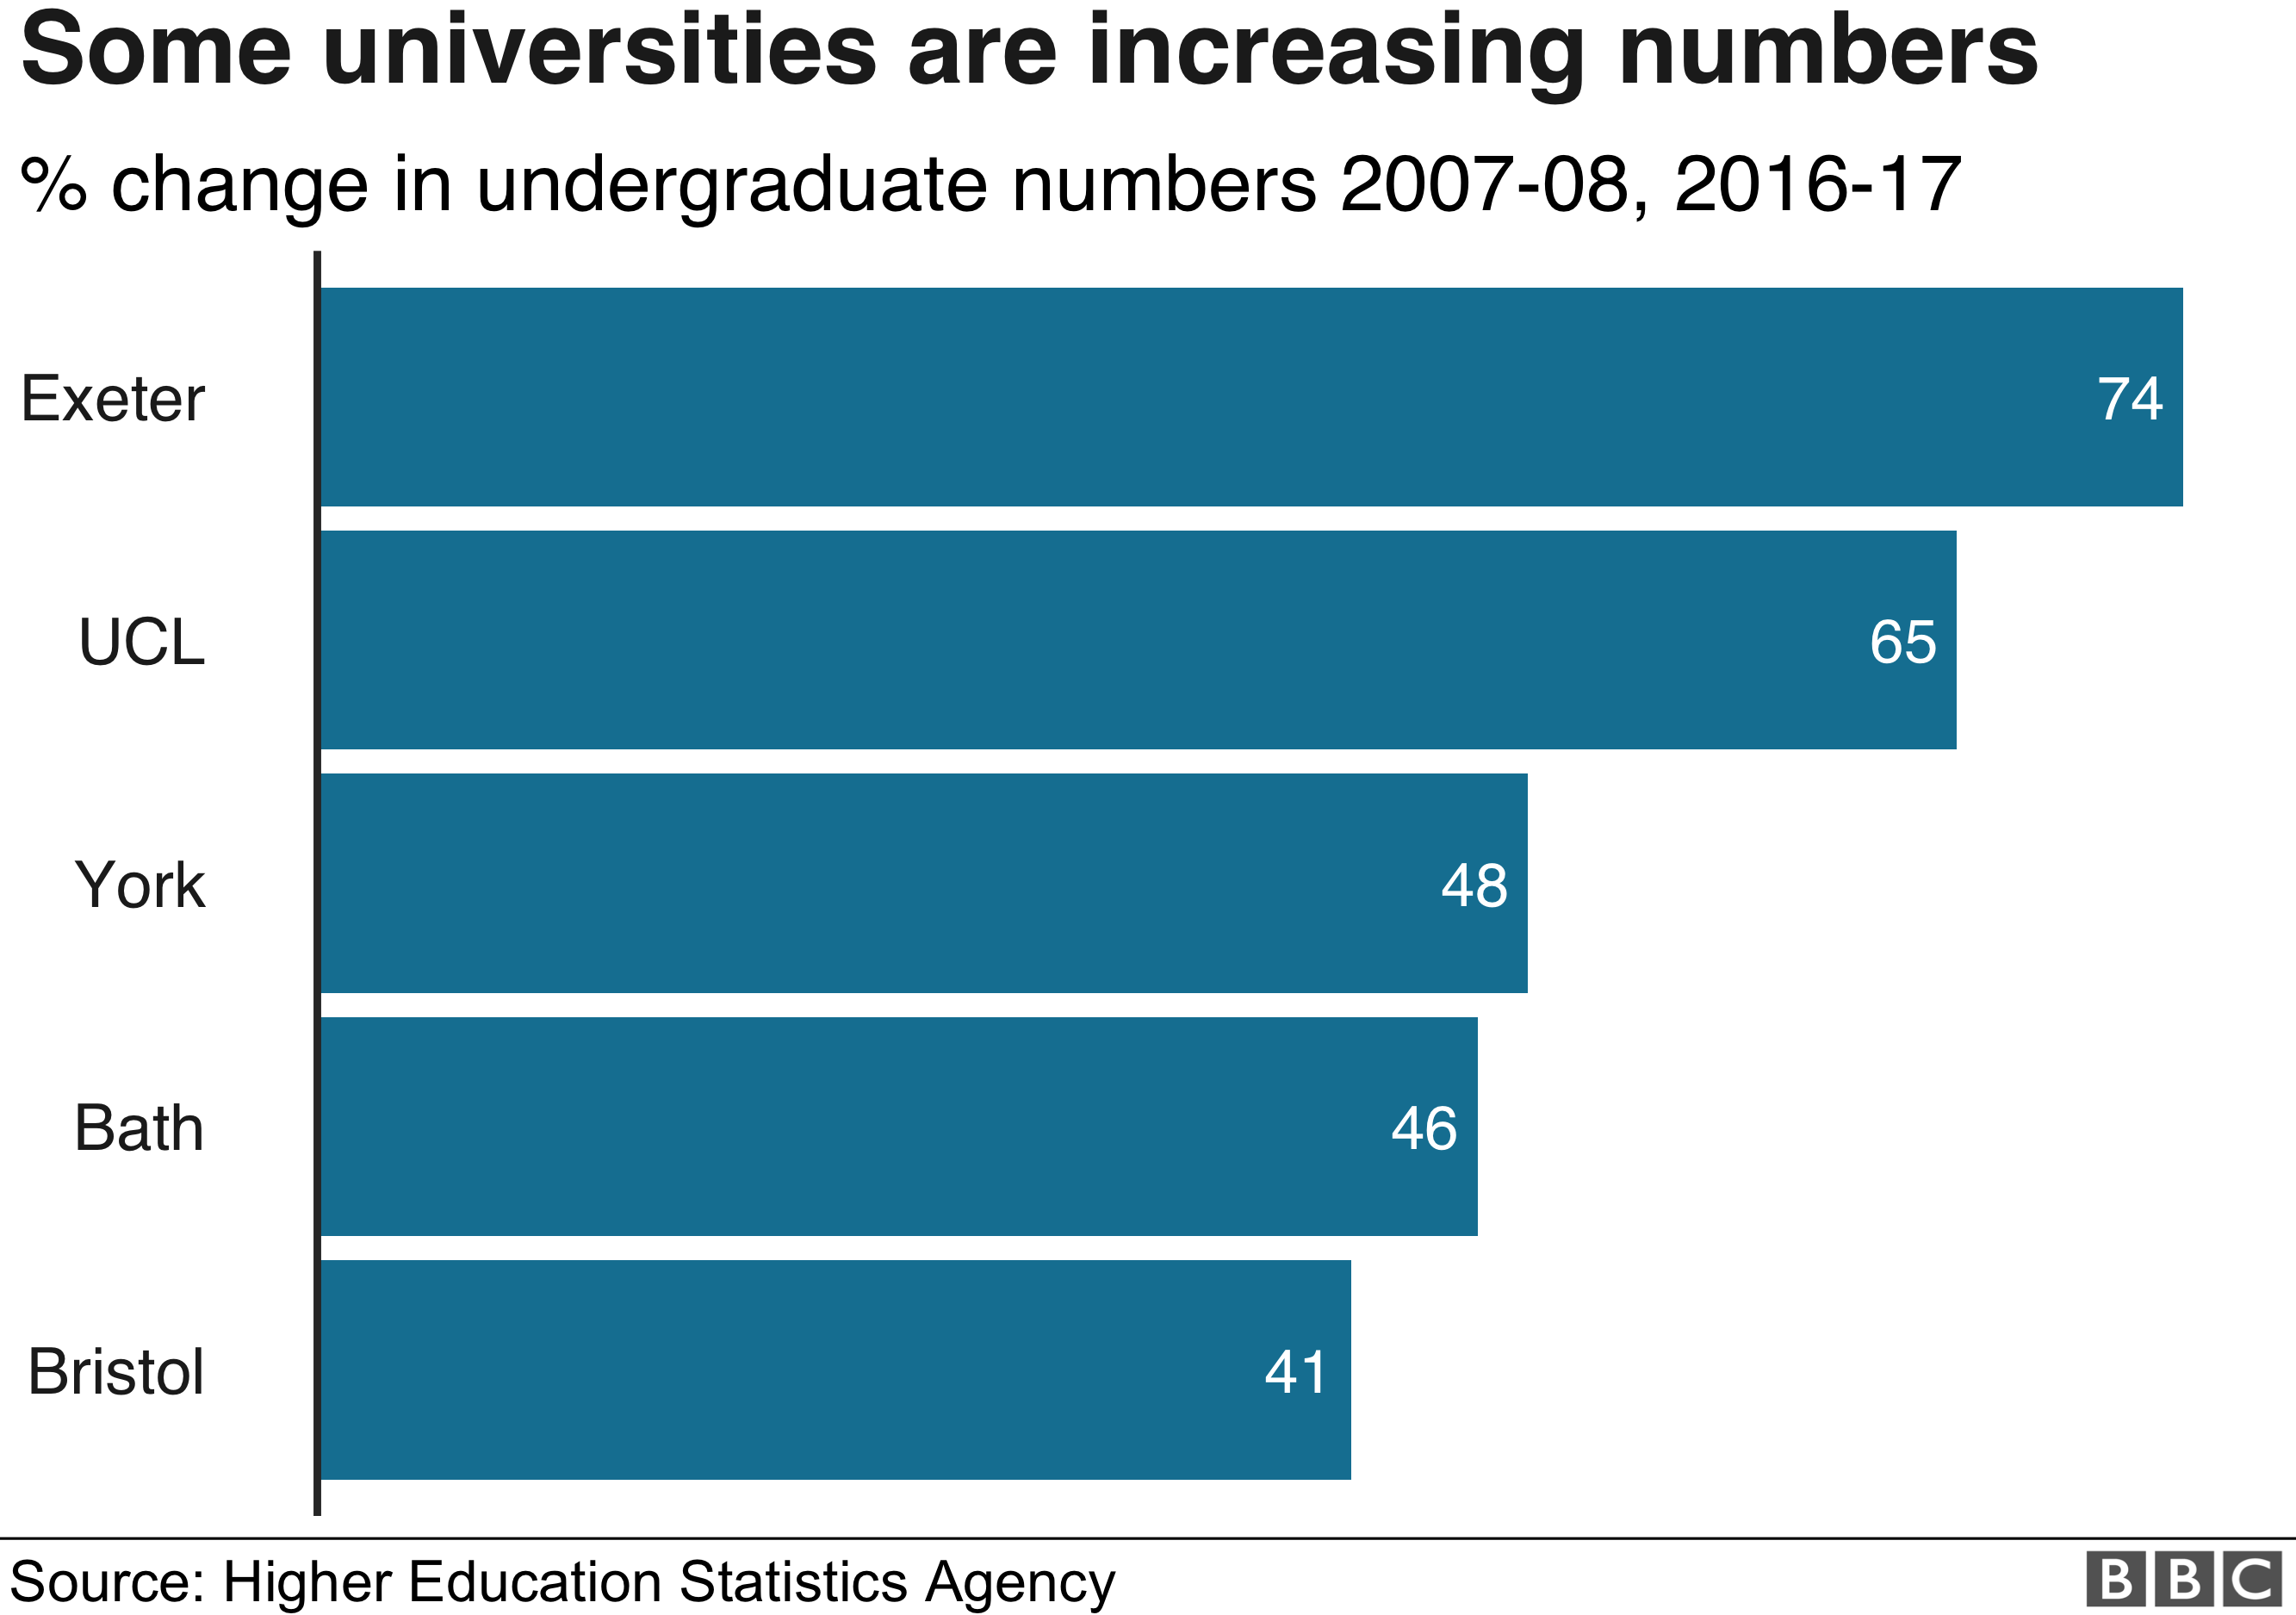 Exeter, UCL York Bath and Bristol have are the five universities that have seen the largest increase in students between 2007-08 and 2016-17